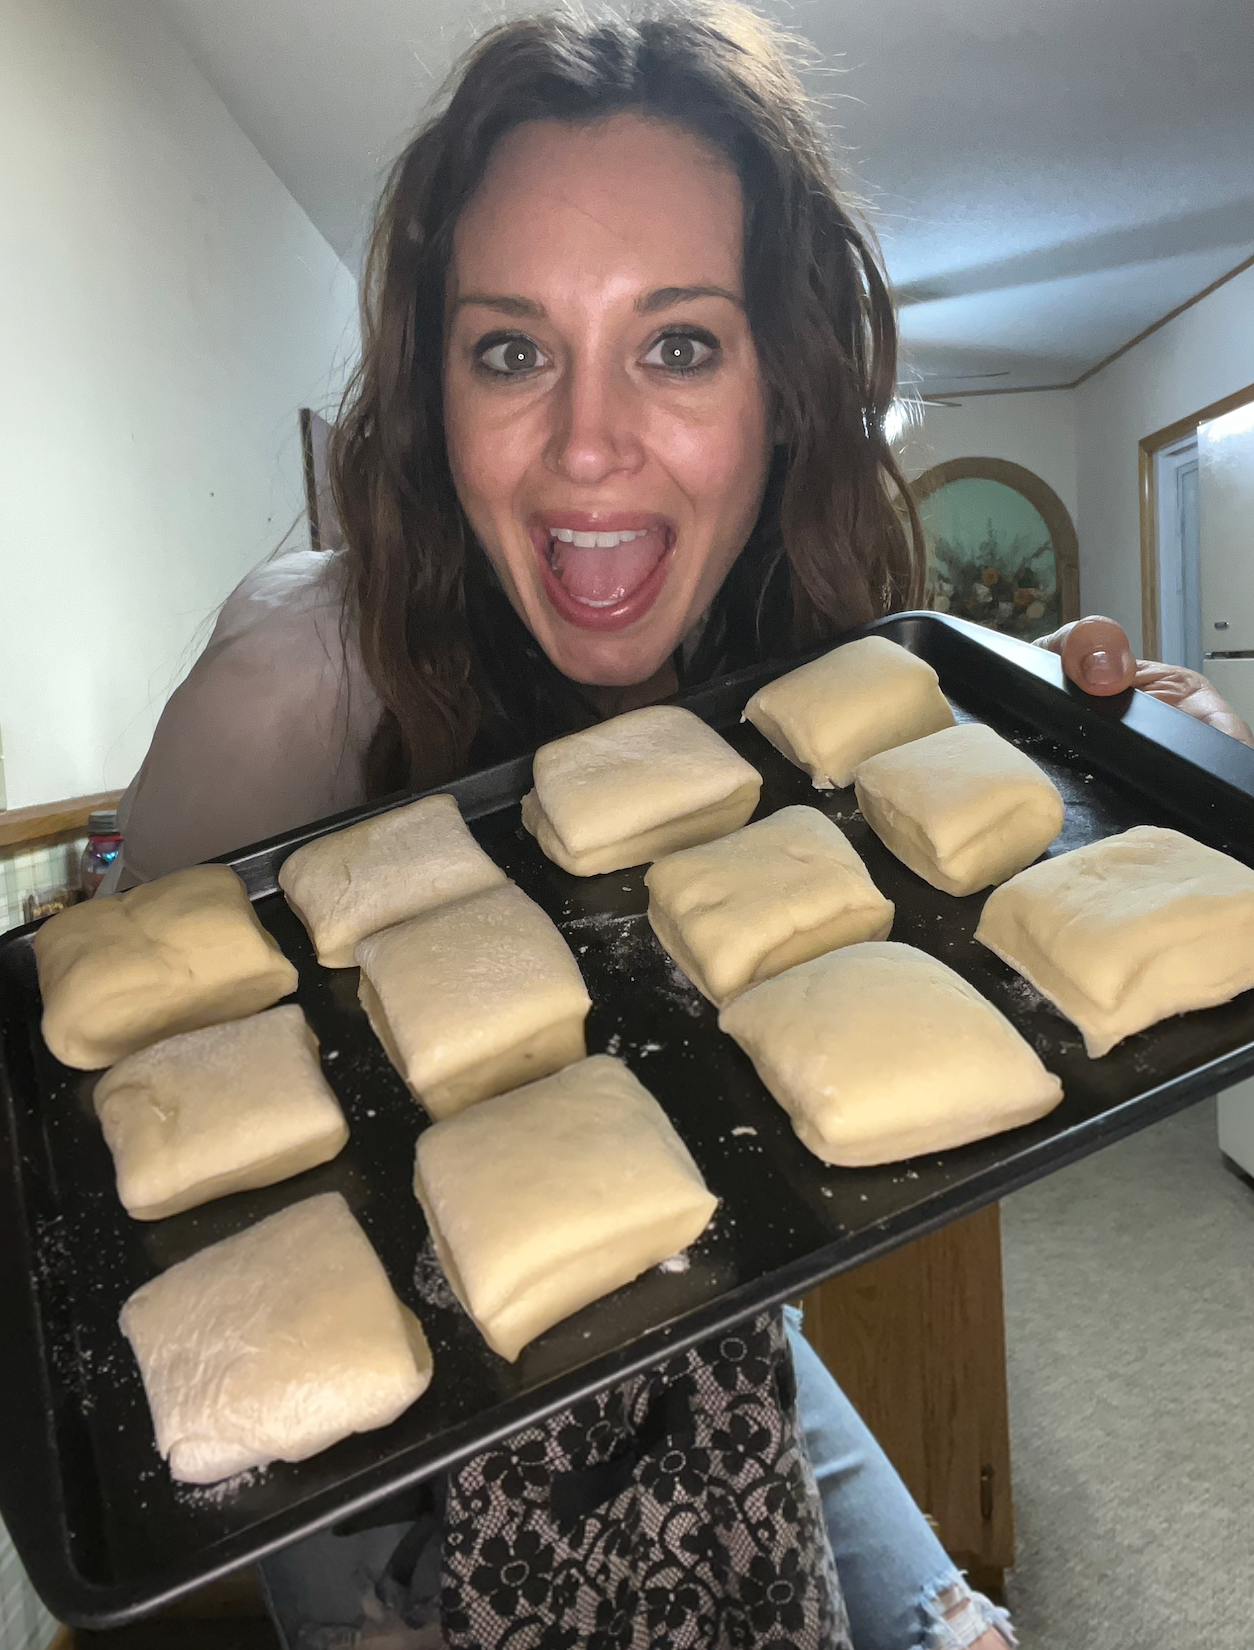 Krista happily holding a tray of 12 risen rolls